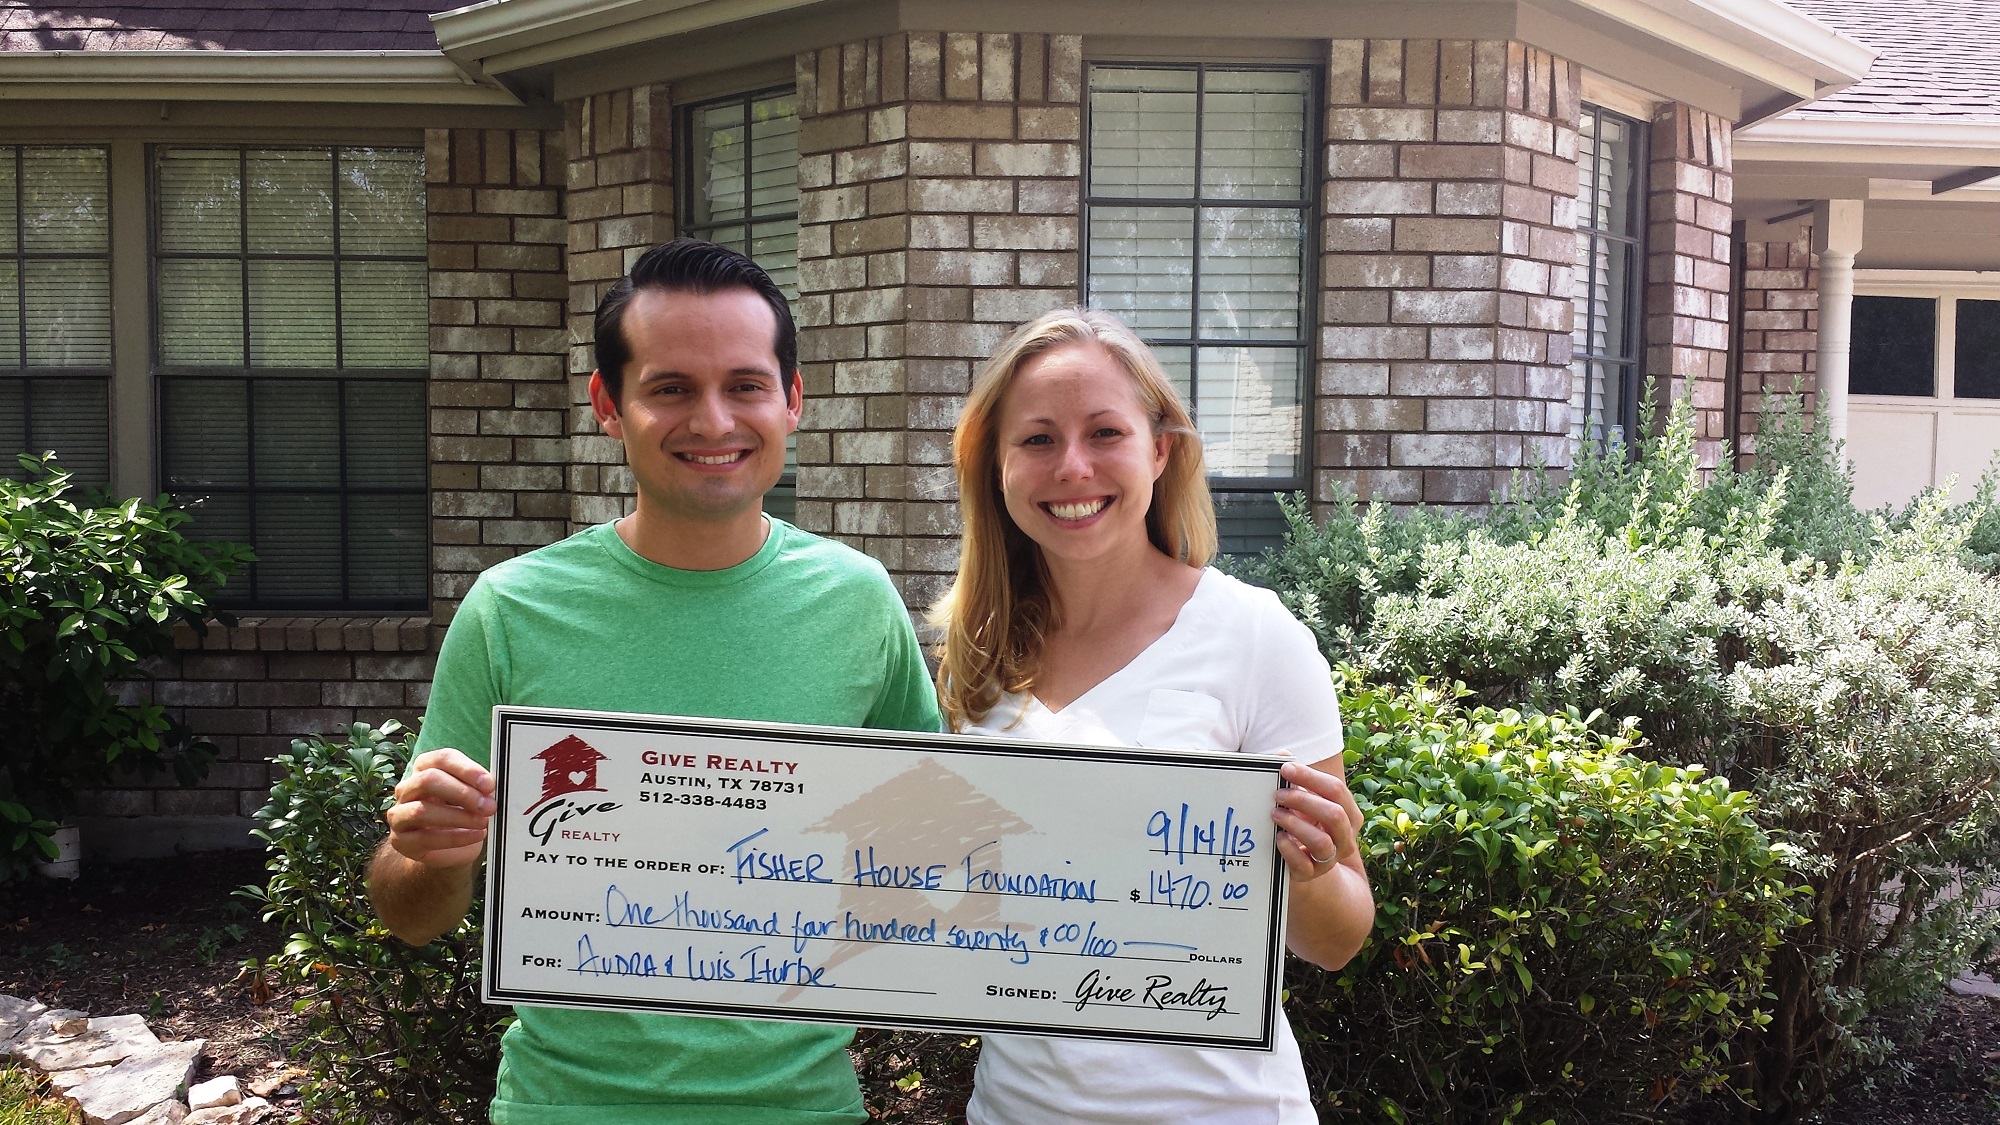 $1,470.00 Donated to Fisher House Inc. on Behalf of Audra and Luis Iturbe